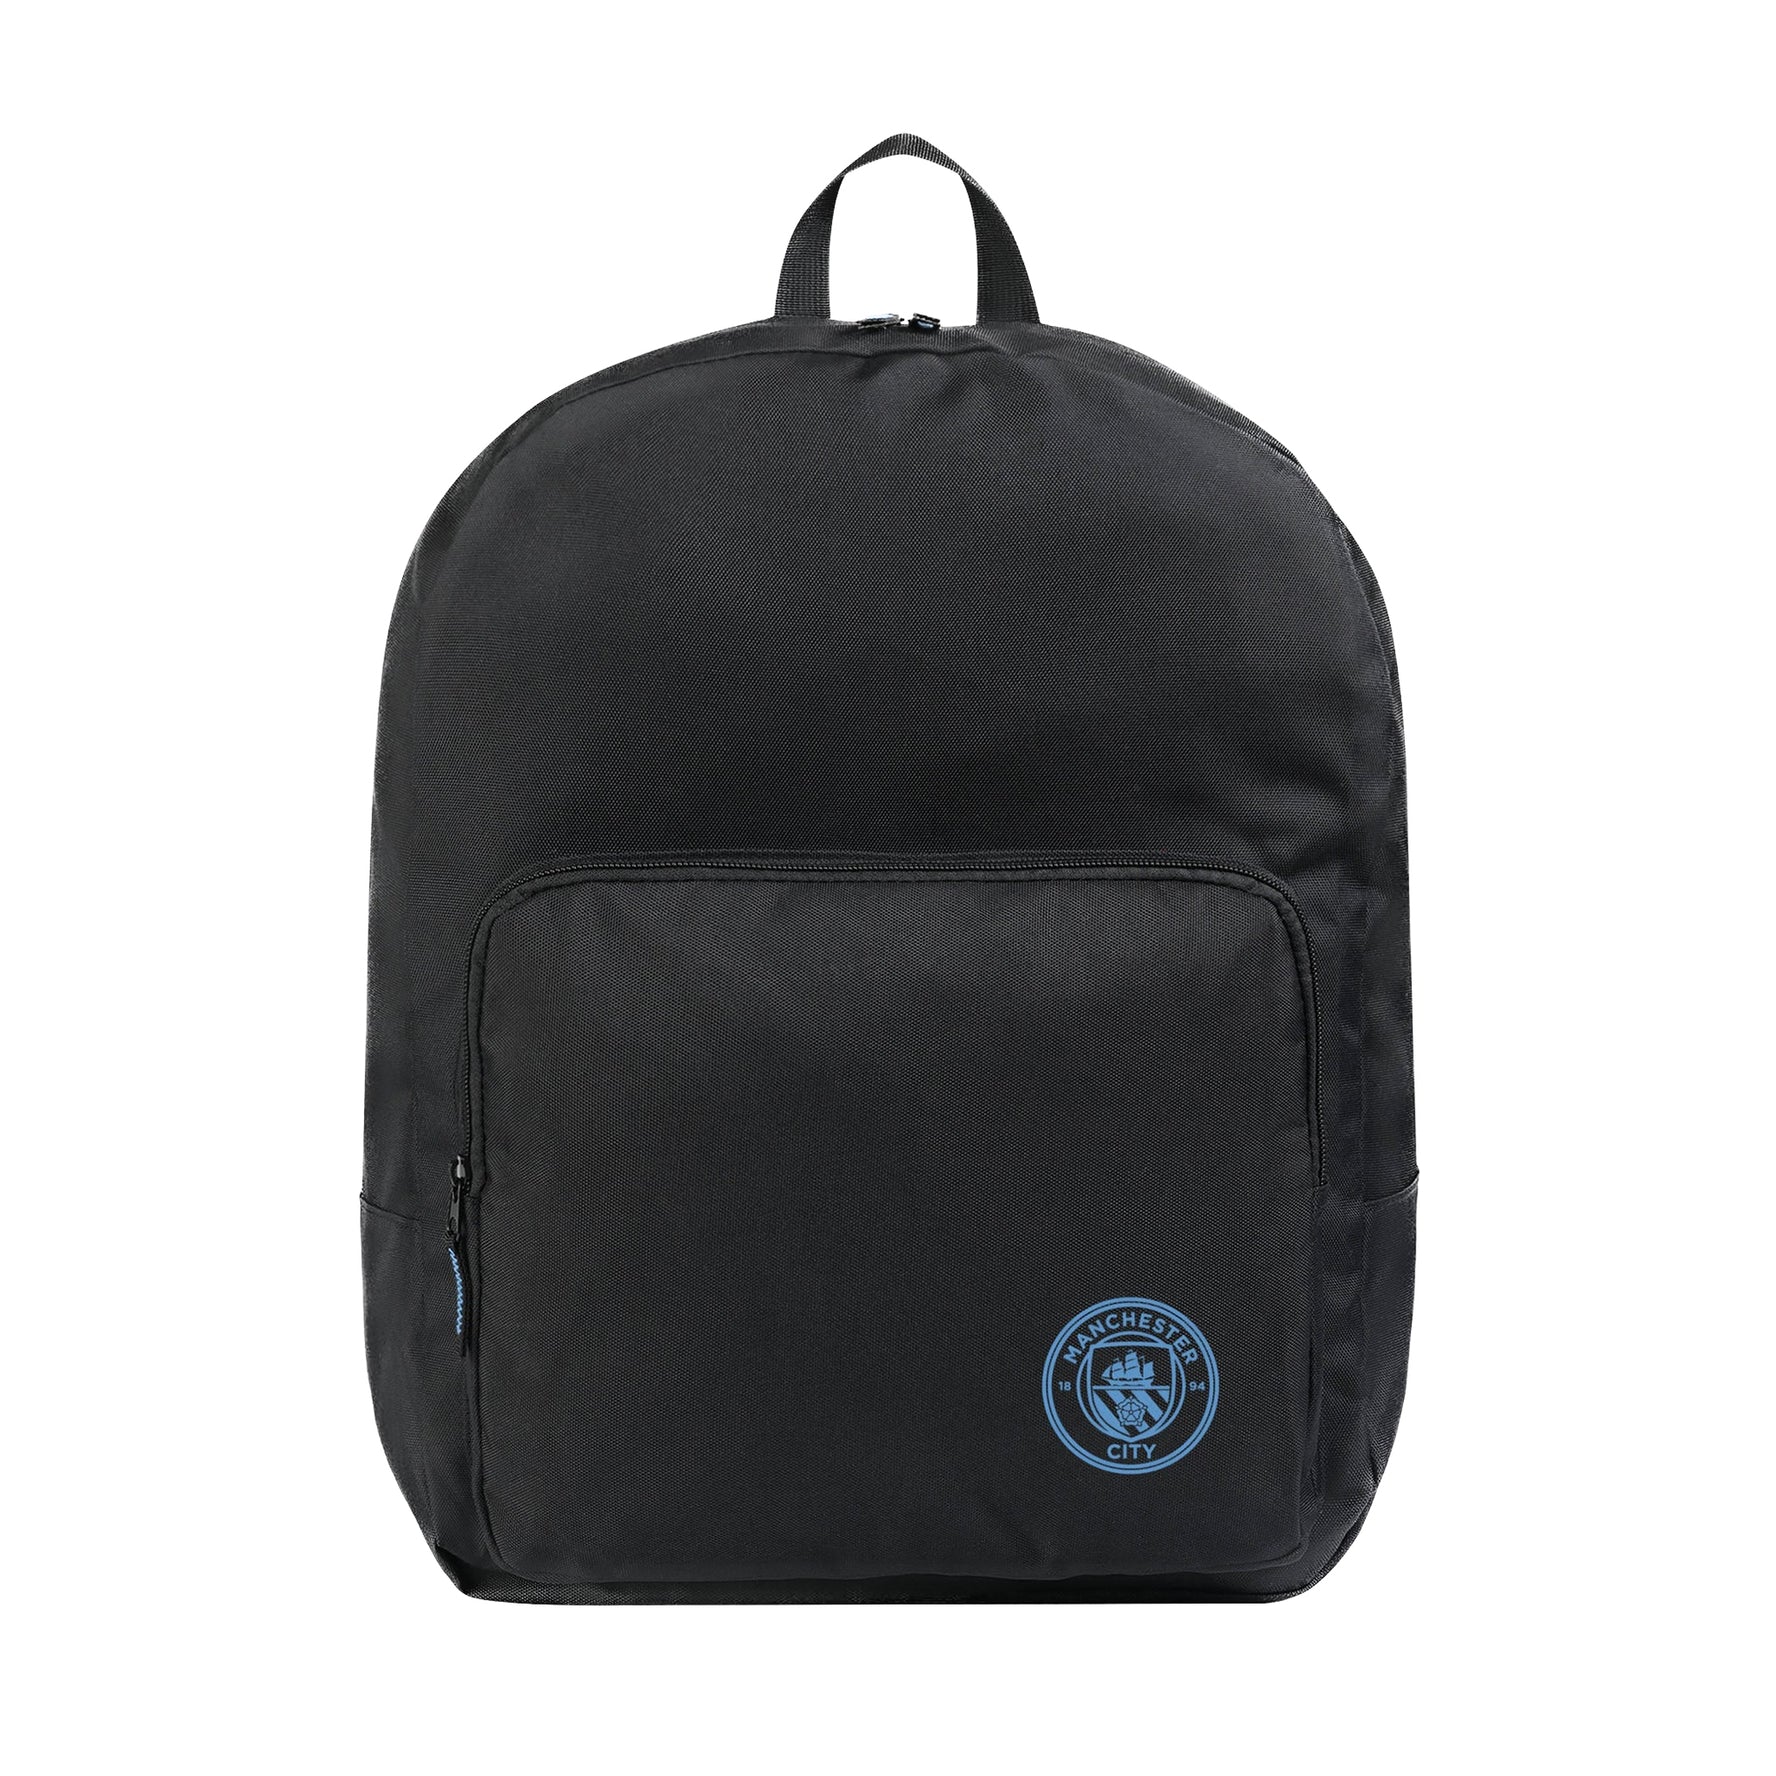 Recycled Classic Football Backpack-Backpack-Football Backpacks-Manchester City FC-SchoolBagsAndStuff